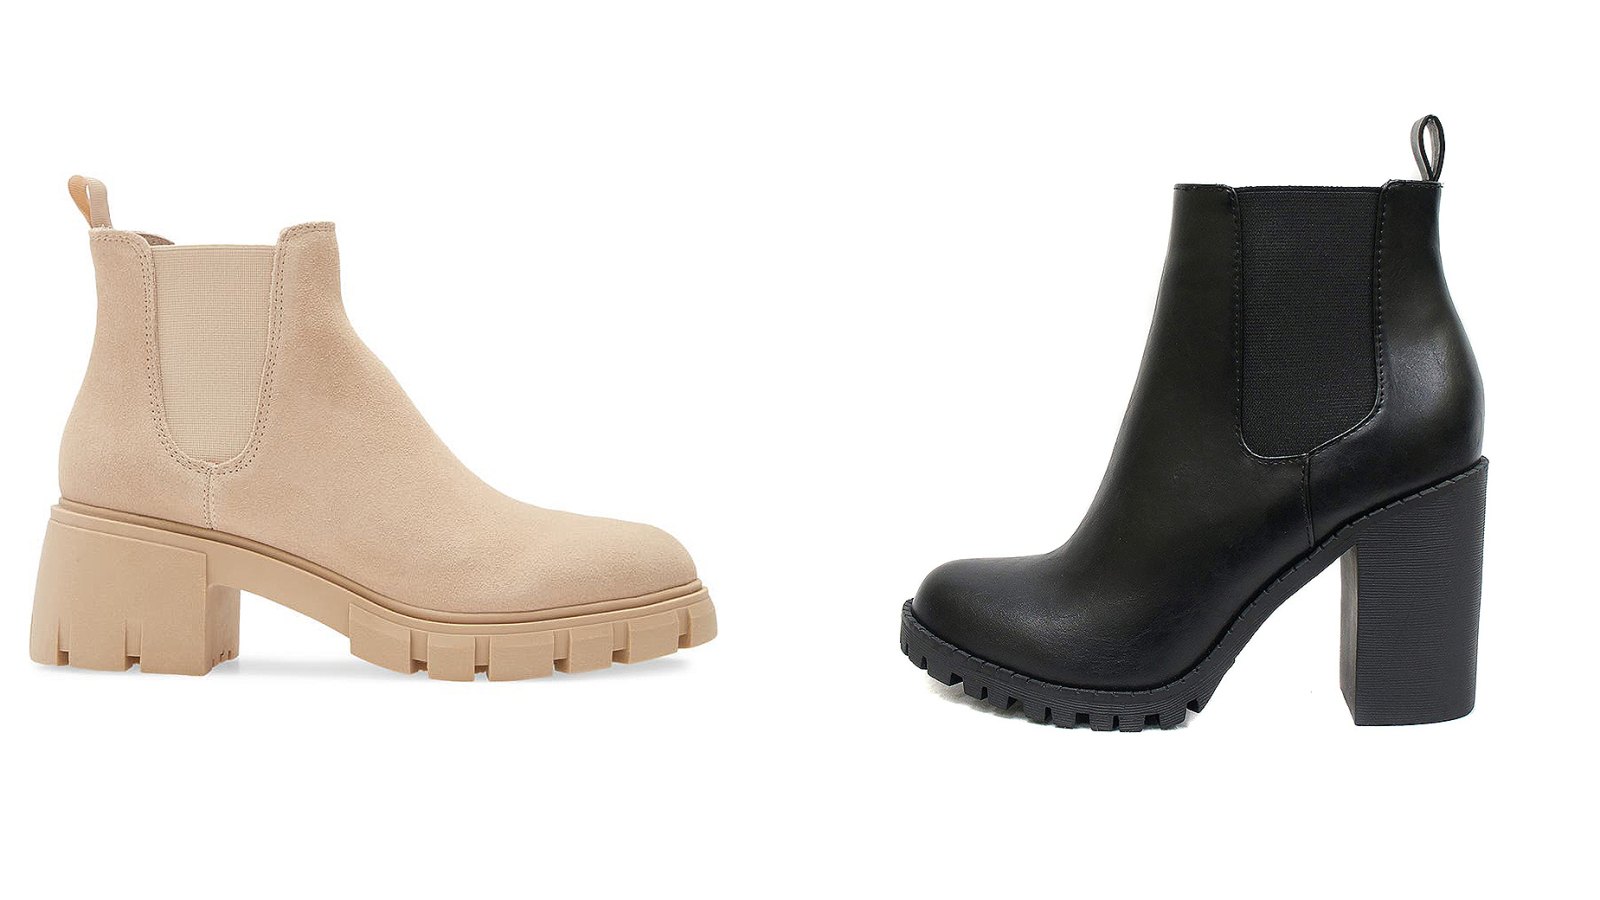 Lug-Sole Boots We're Obsessed With Right Now — Starting at $27